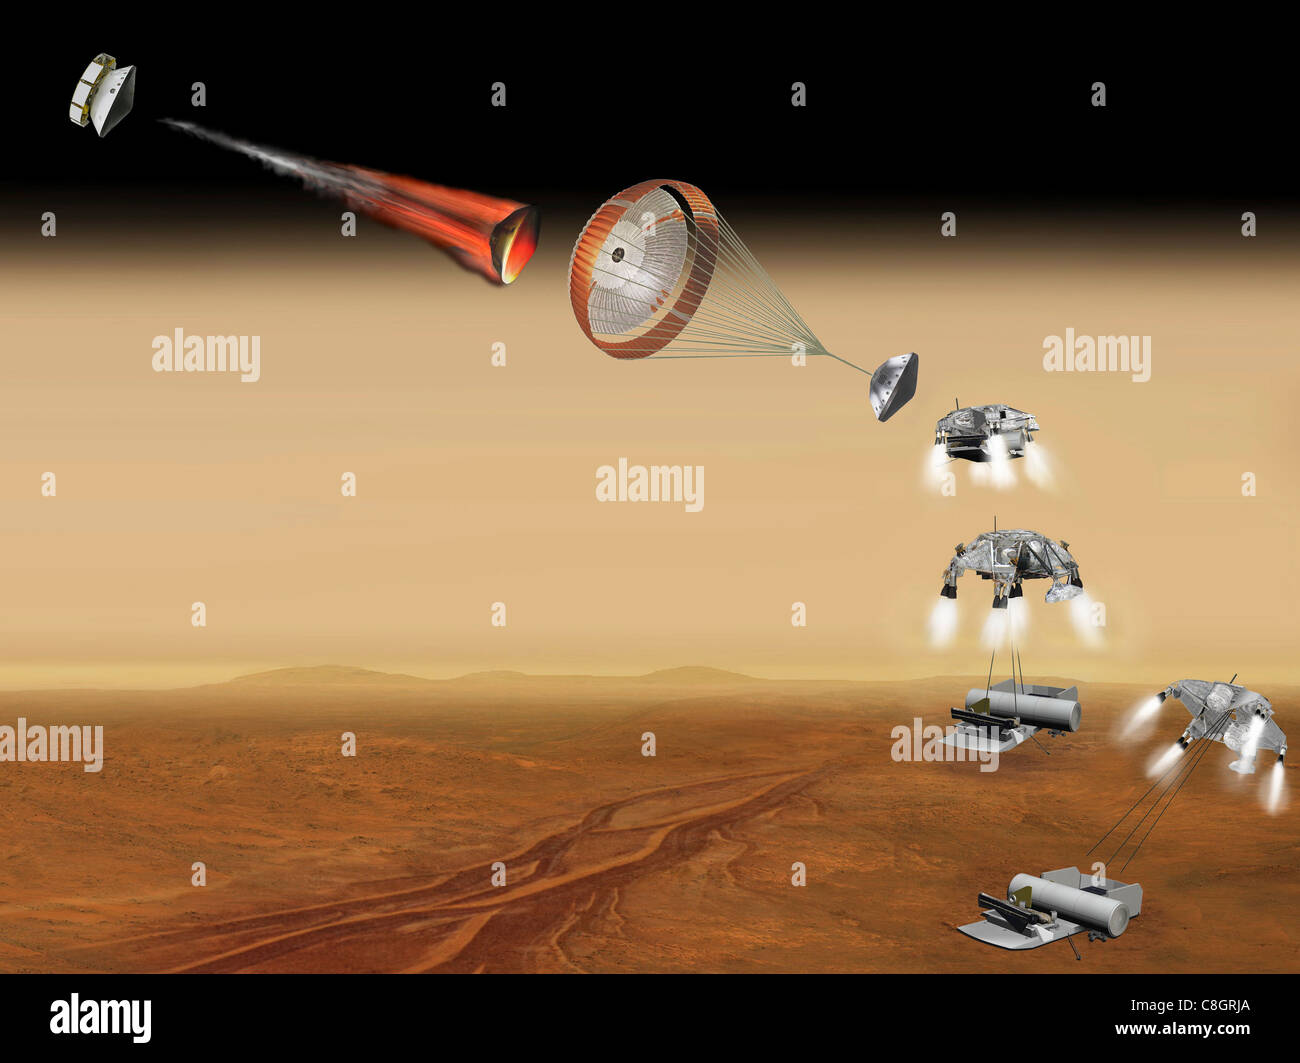 Vehicle for Lofting a Sample Approaches Mars (Artist's Concept) Stock Photo